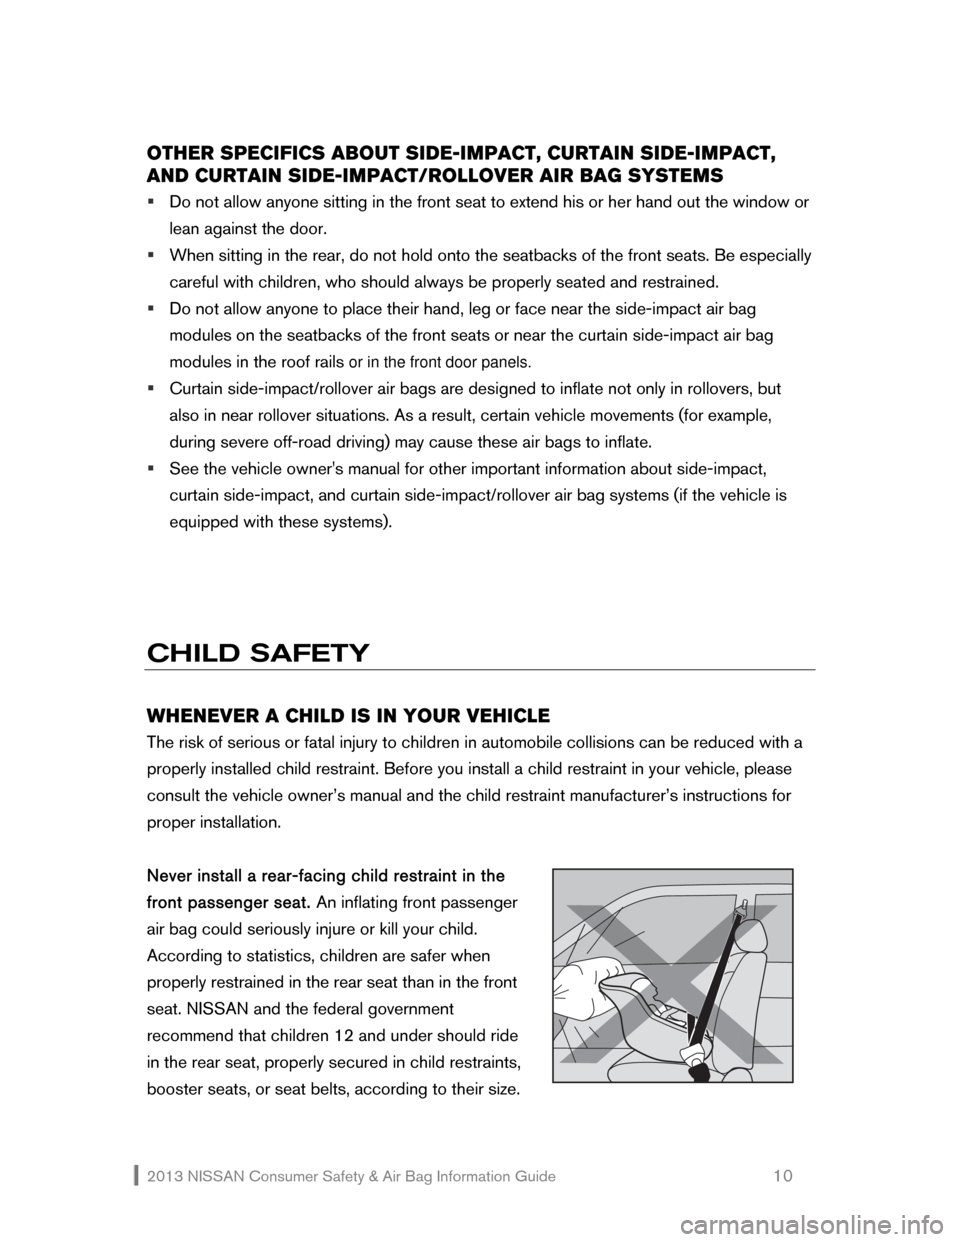 NISSAN XTERRA 2013 N50 / 2.G Consumer Safety Air Bag Information Guide 2013 NISSAN Consumer Safety & Air Bag Information Guide                                                   10 
OTHER SPECIFICS ABOUT SIDE-IMPACT, CURTAIN SIDE-IMPACT, 
AND CURTAIN SIDE-IMPACT/ROLLOVER 